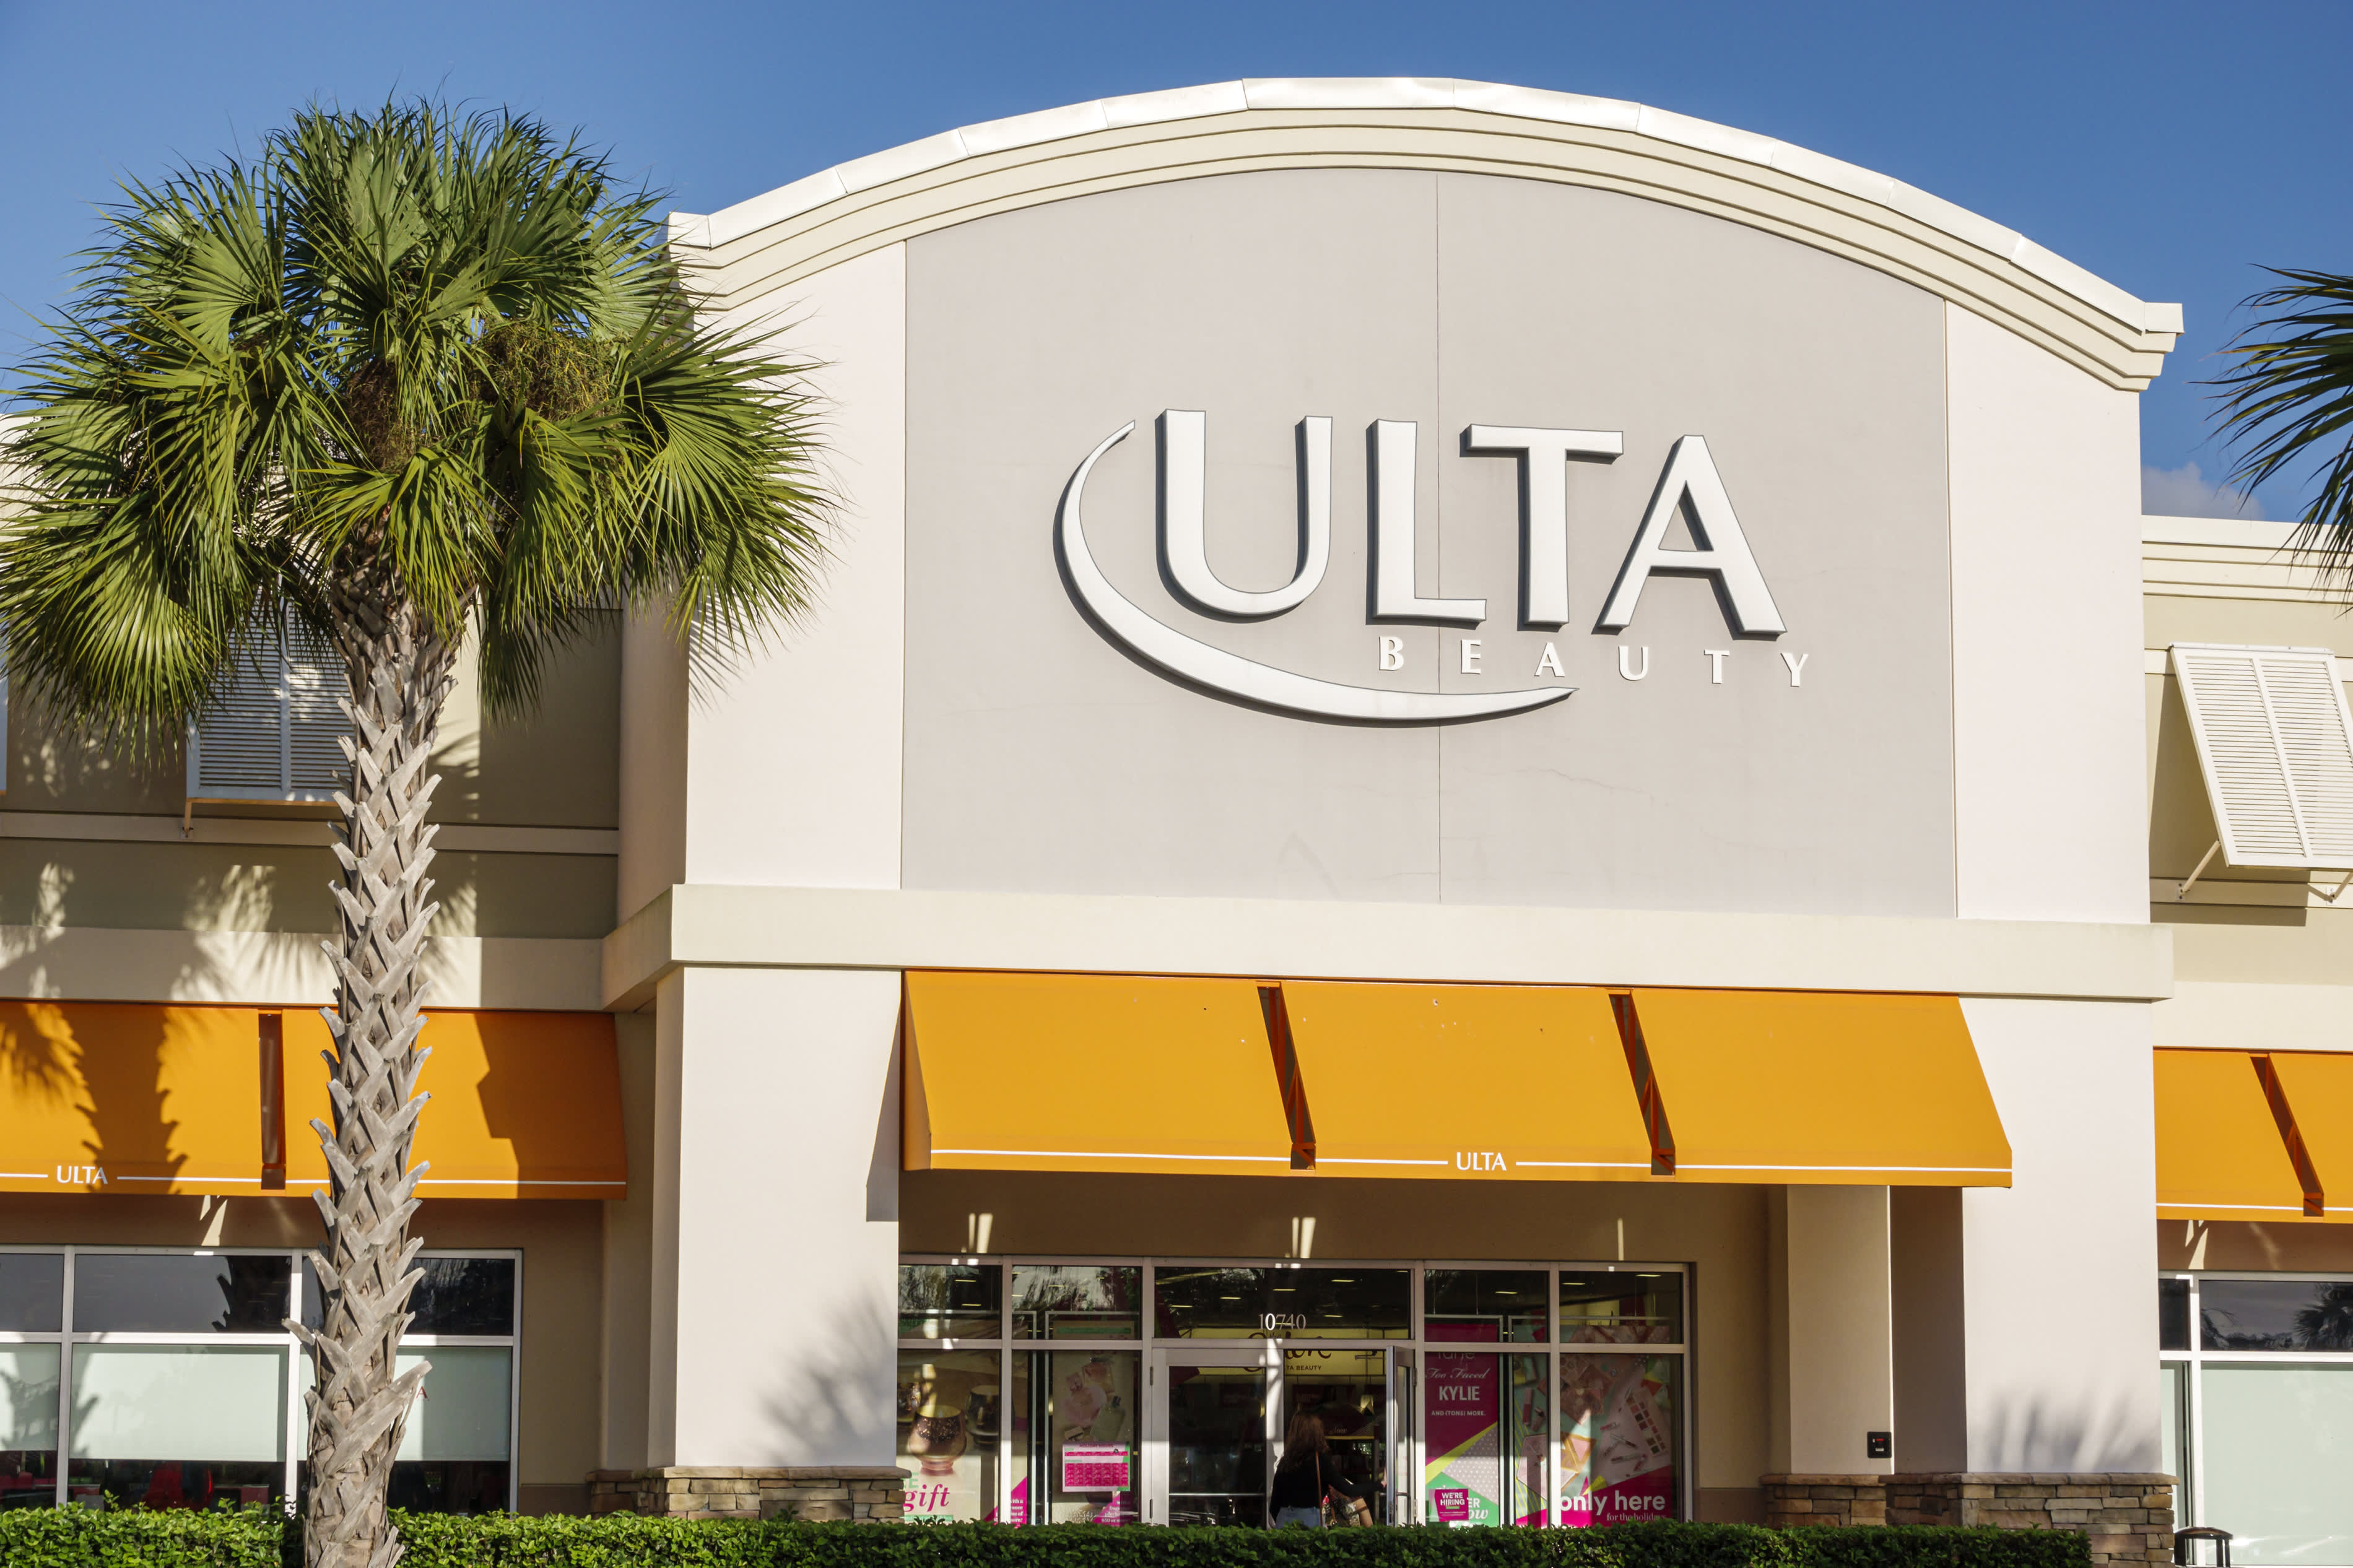 Ulta shares rise after beauty retailer posts 60% gain in revenue, as makeup sales recover